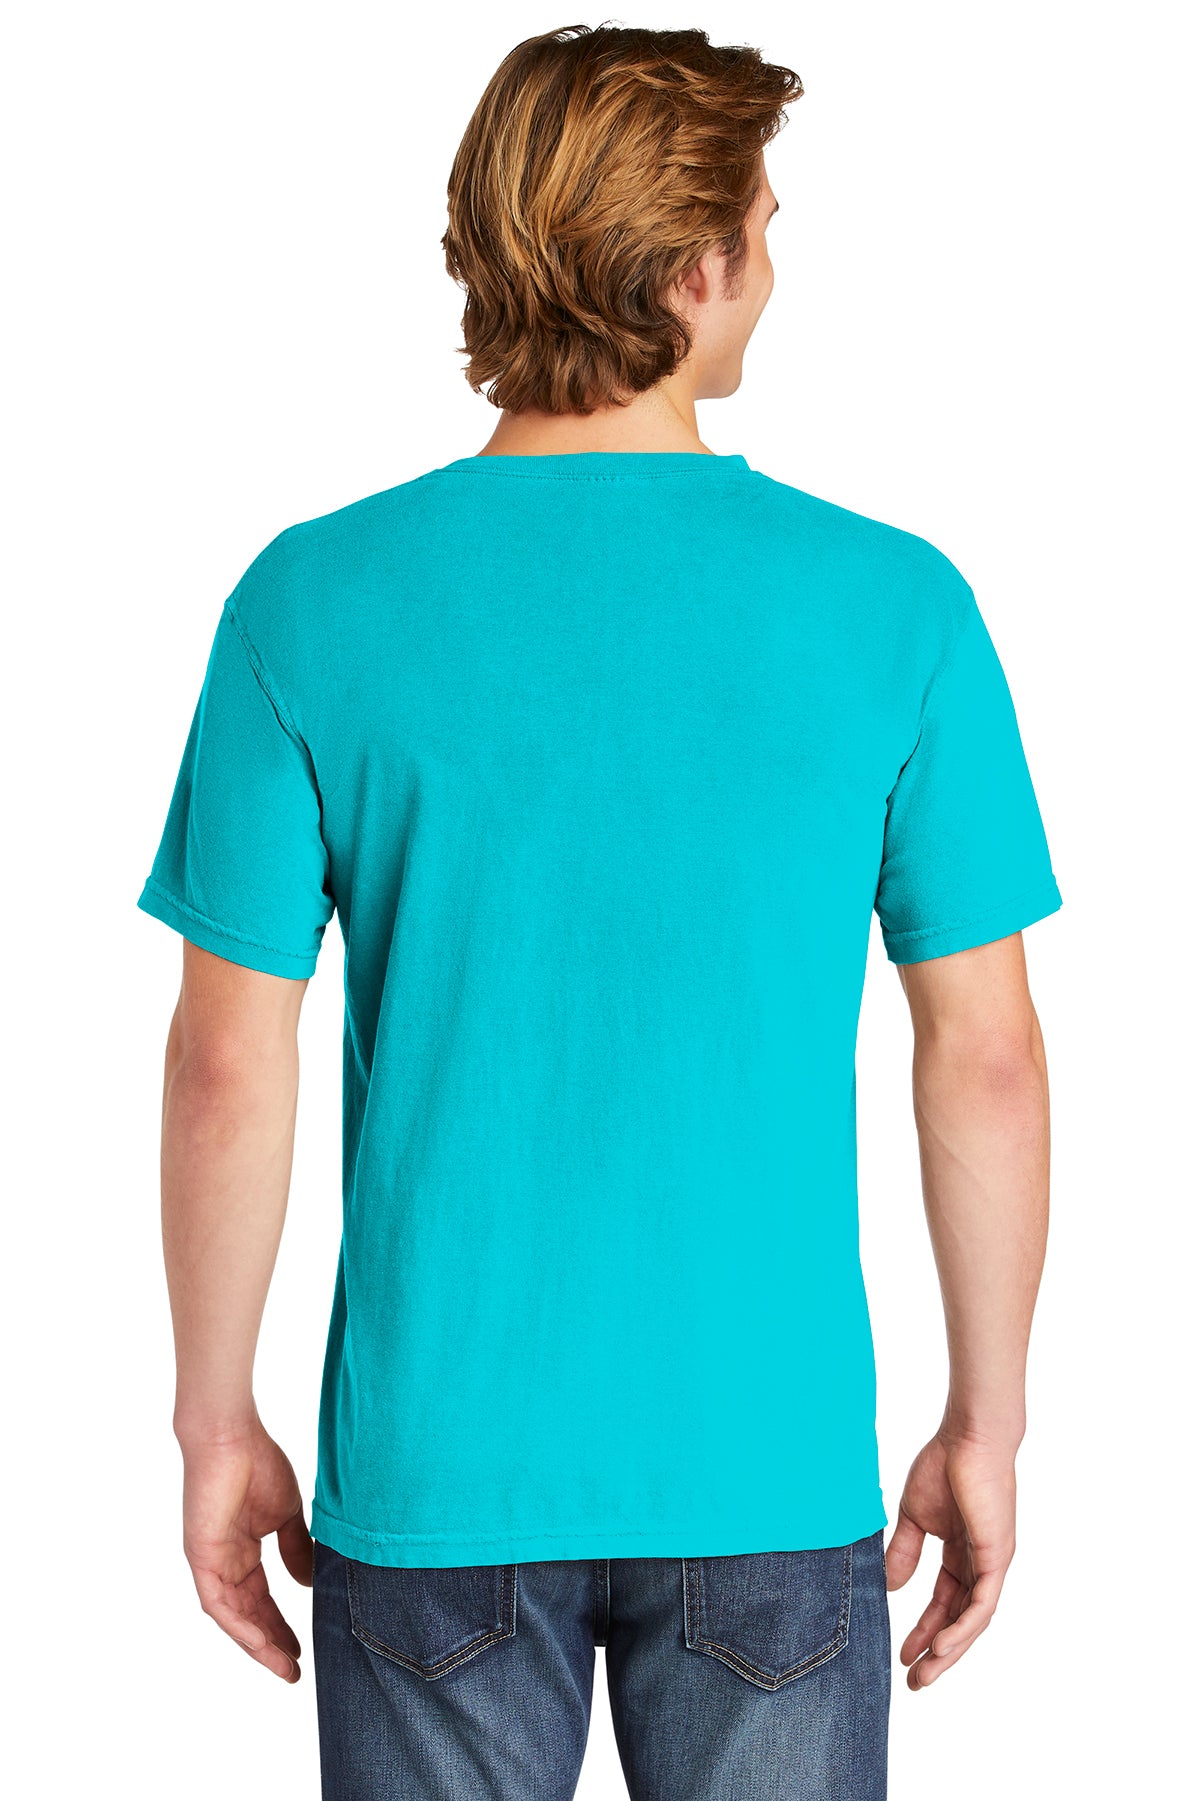 Comfort Colors Garment-Dyed Tee (1717)